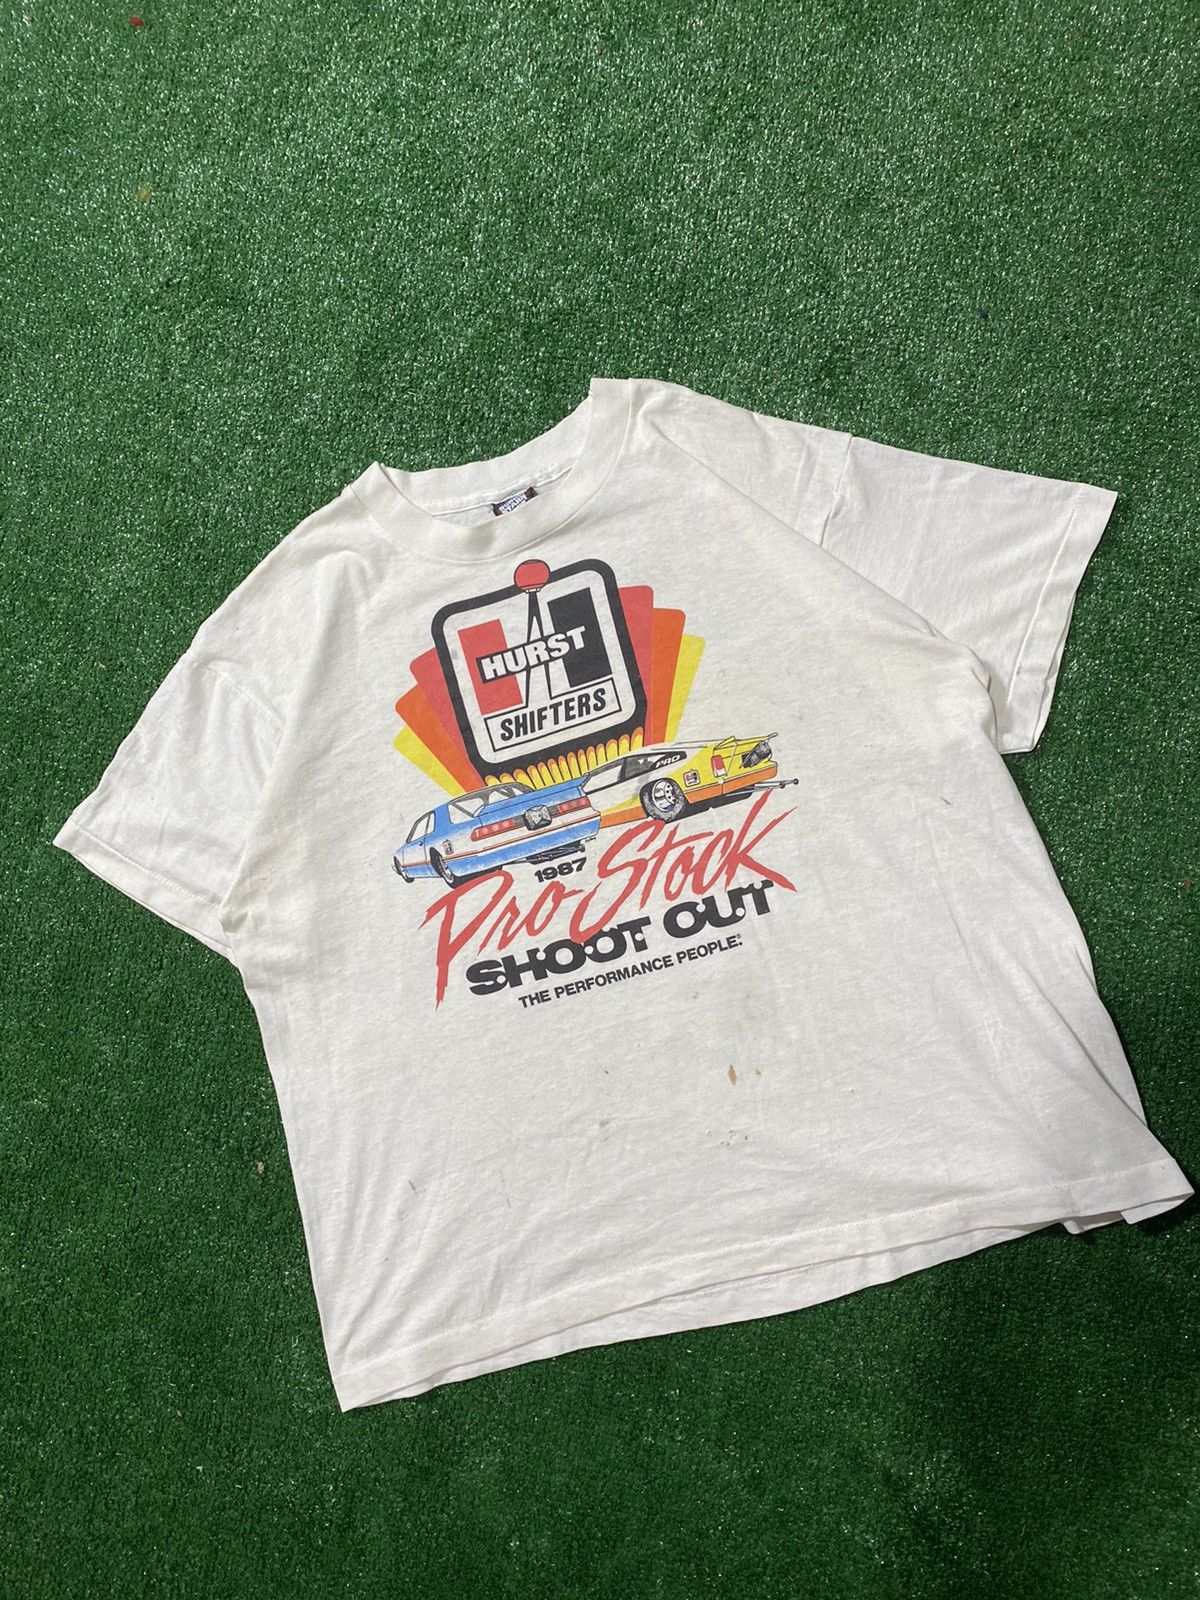 Vintage Vintage 1987 Hurst Shifters Pro Stock Racing Graphic Tee | Grailed